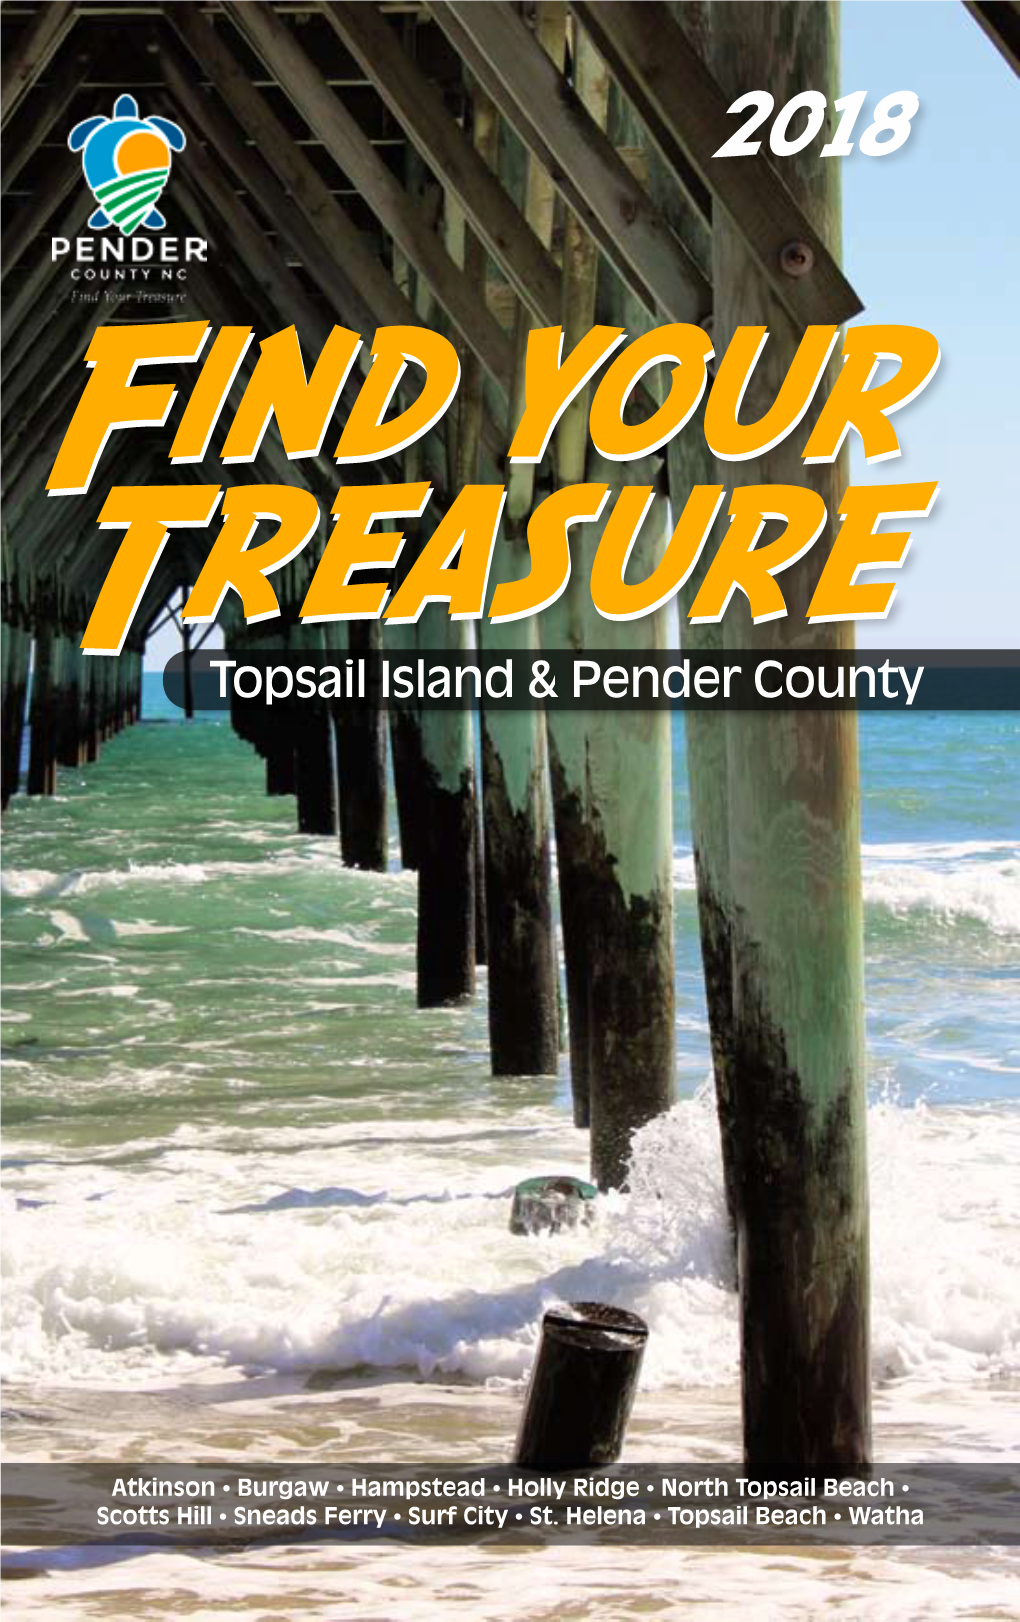 Topsail Island & Pender County